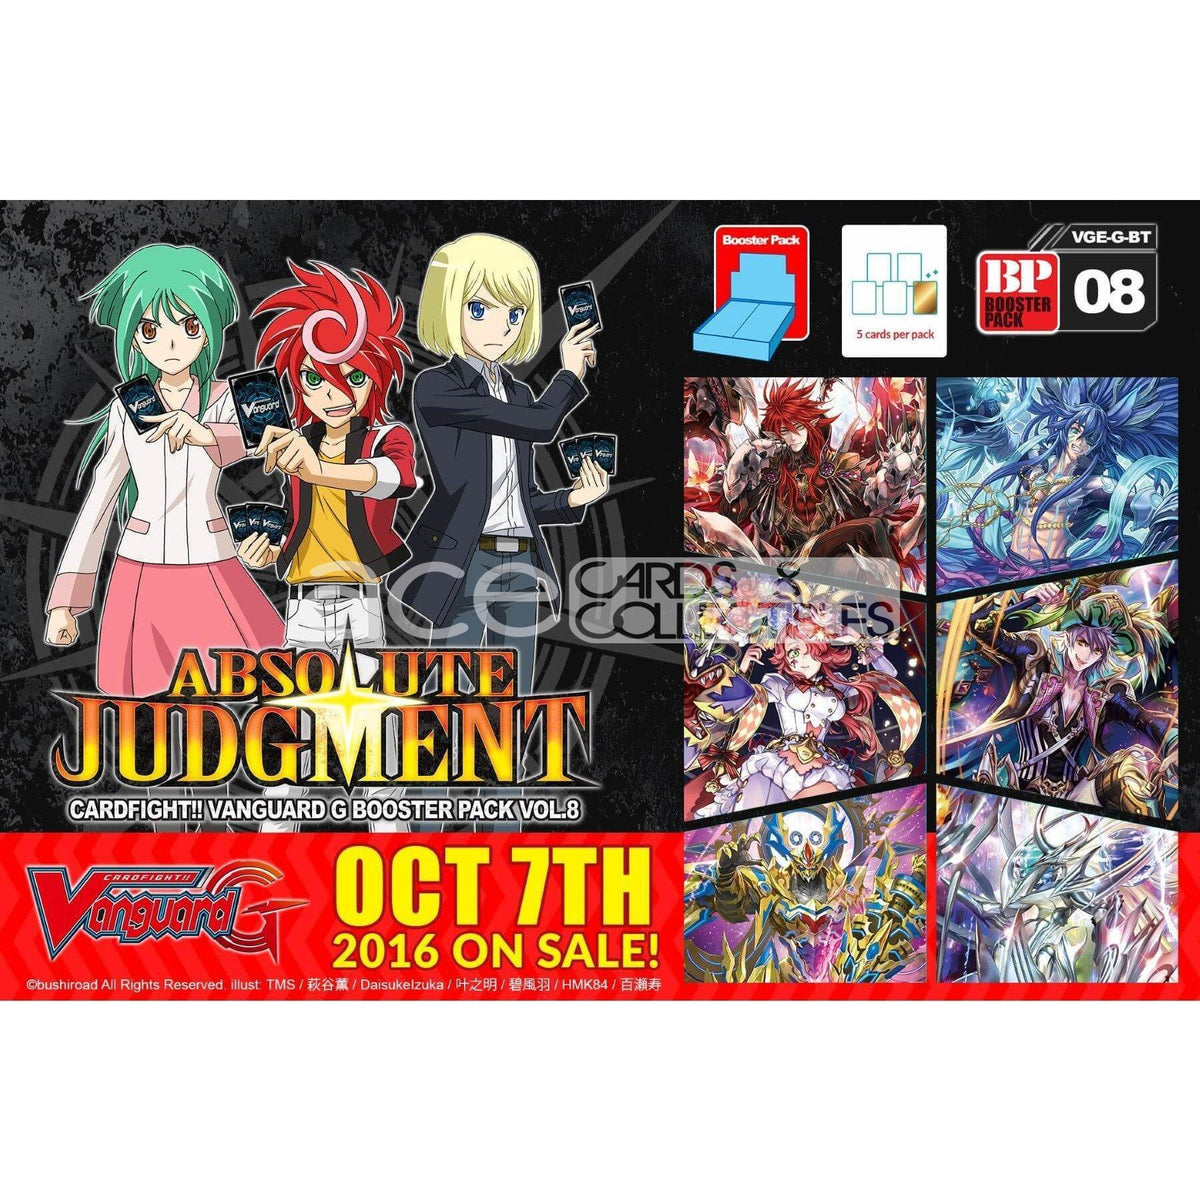 Cardfight Vanguard G Absolute Judgment [VGE-G-BT08] (English)-Single Pack (Random)-Bushiroad-Ace Cards &amp; Collectibles